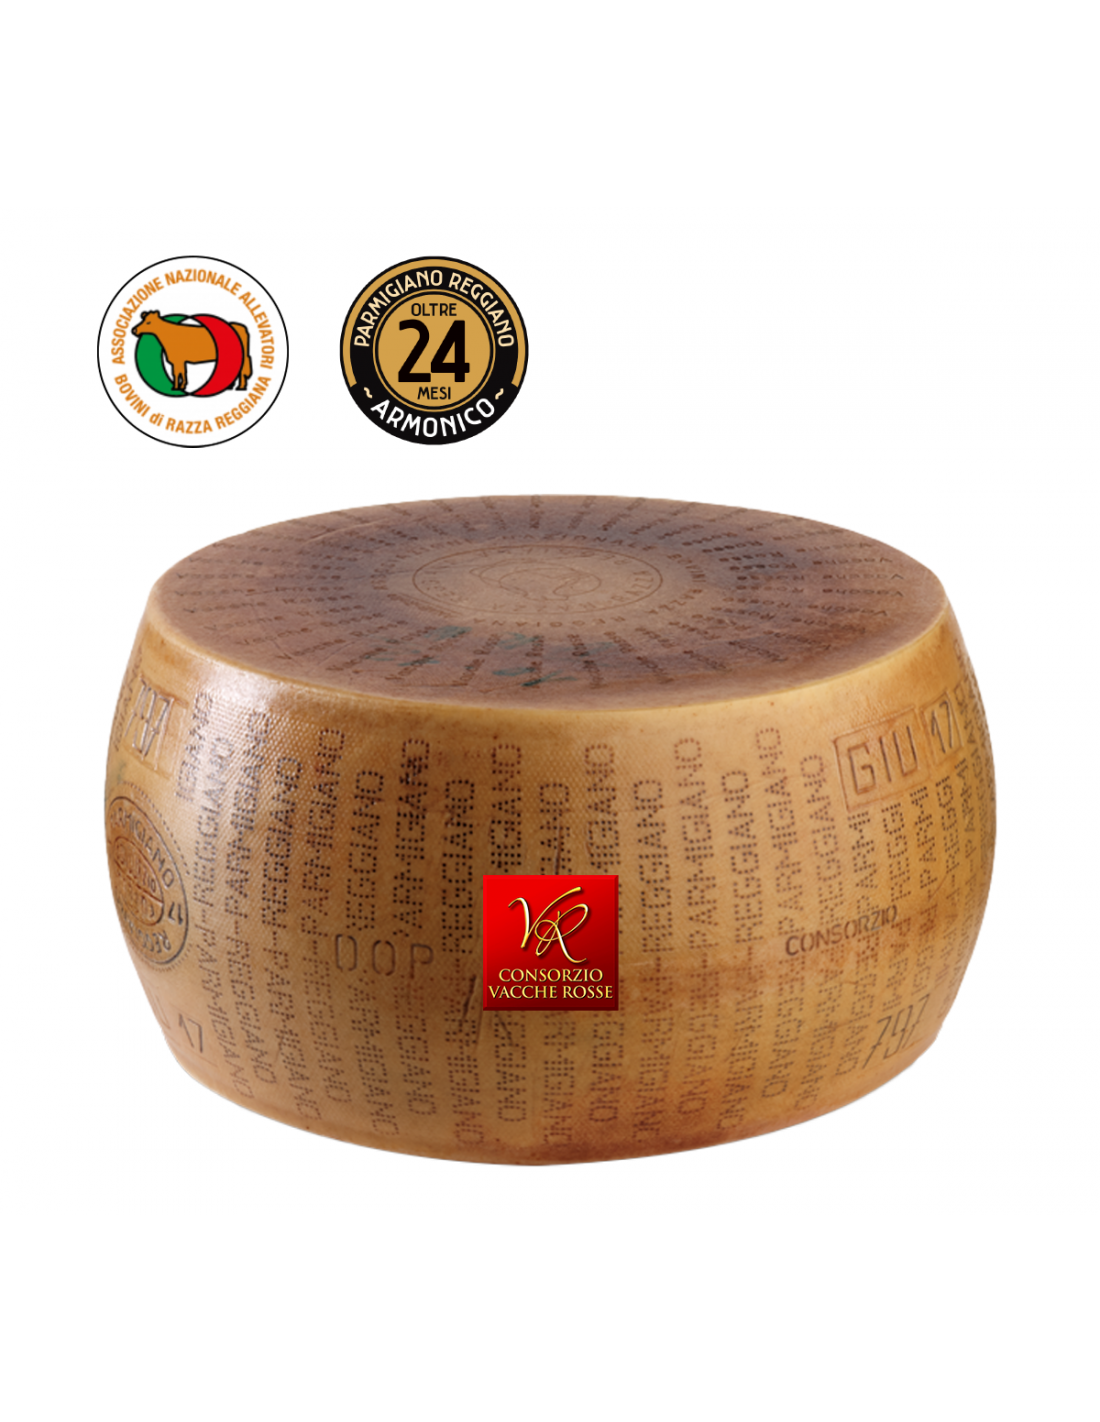 https://www.parmashop.com/7441-thickbox_default/parmigiano-reggiano-pdo-a-whole-wheel-of-cheese-red-cows-qual-extra.jpg